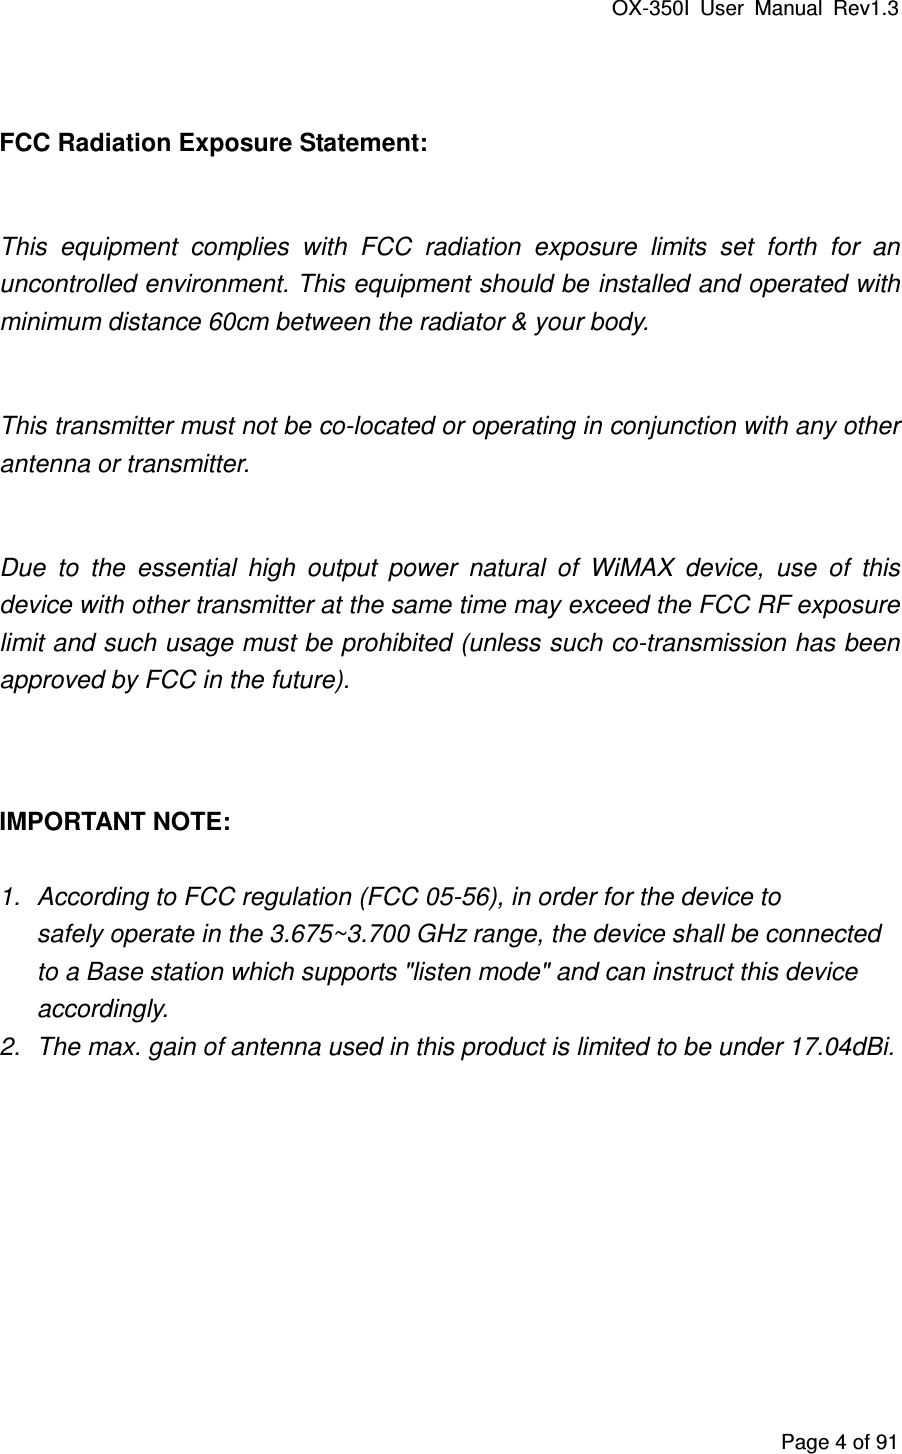 OX-350I  User  Manual  Rev1.3 Page 4 of 91  FCC Radiation Exposure Statement:  This  equipment  complies  with  FCC  radiation  exposure  limits  set  forth  for  an uncontrolled environment. This equipment should be installed and operated with minimum distance 60cm between the radiator &amp; your body.  This transmitter must not be co-located or operating in conjunction with any other antenna or transmitter.  Due  to  the  essential  high  output  power  natural  of  WiMAX  device,  use  of  this device with other transmitter at the same time may exceed the FCC RF exposure limit and such usage must be prohibited (unless such co-transmission has been approved by FCC in the future).   IMPORTANT NOTE:  1.  According to FCC regulation (FCC 05-56), in order for the device to safely operate in the 3.675~3.700 GHz range, the device shall be connected to a Base station which supports &quot;listen mode&quot; and can instruct this device accordingly. 2.  The max. gain of antenna used in this product is limited to be under 17.04dBi.    